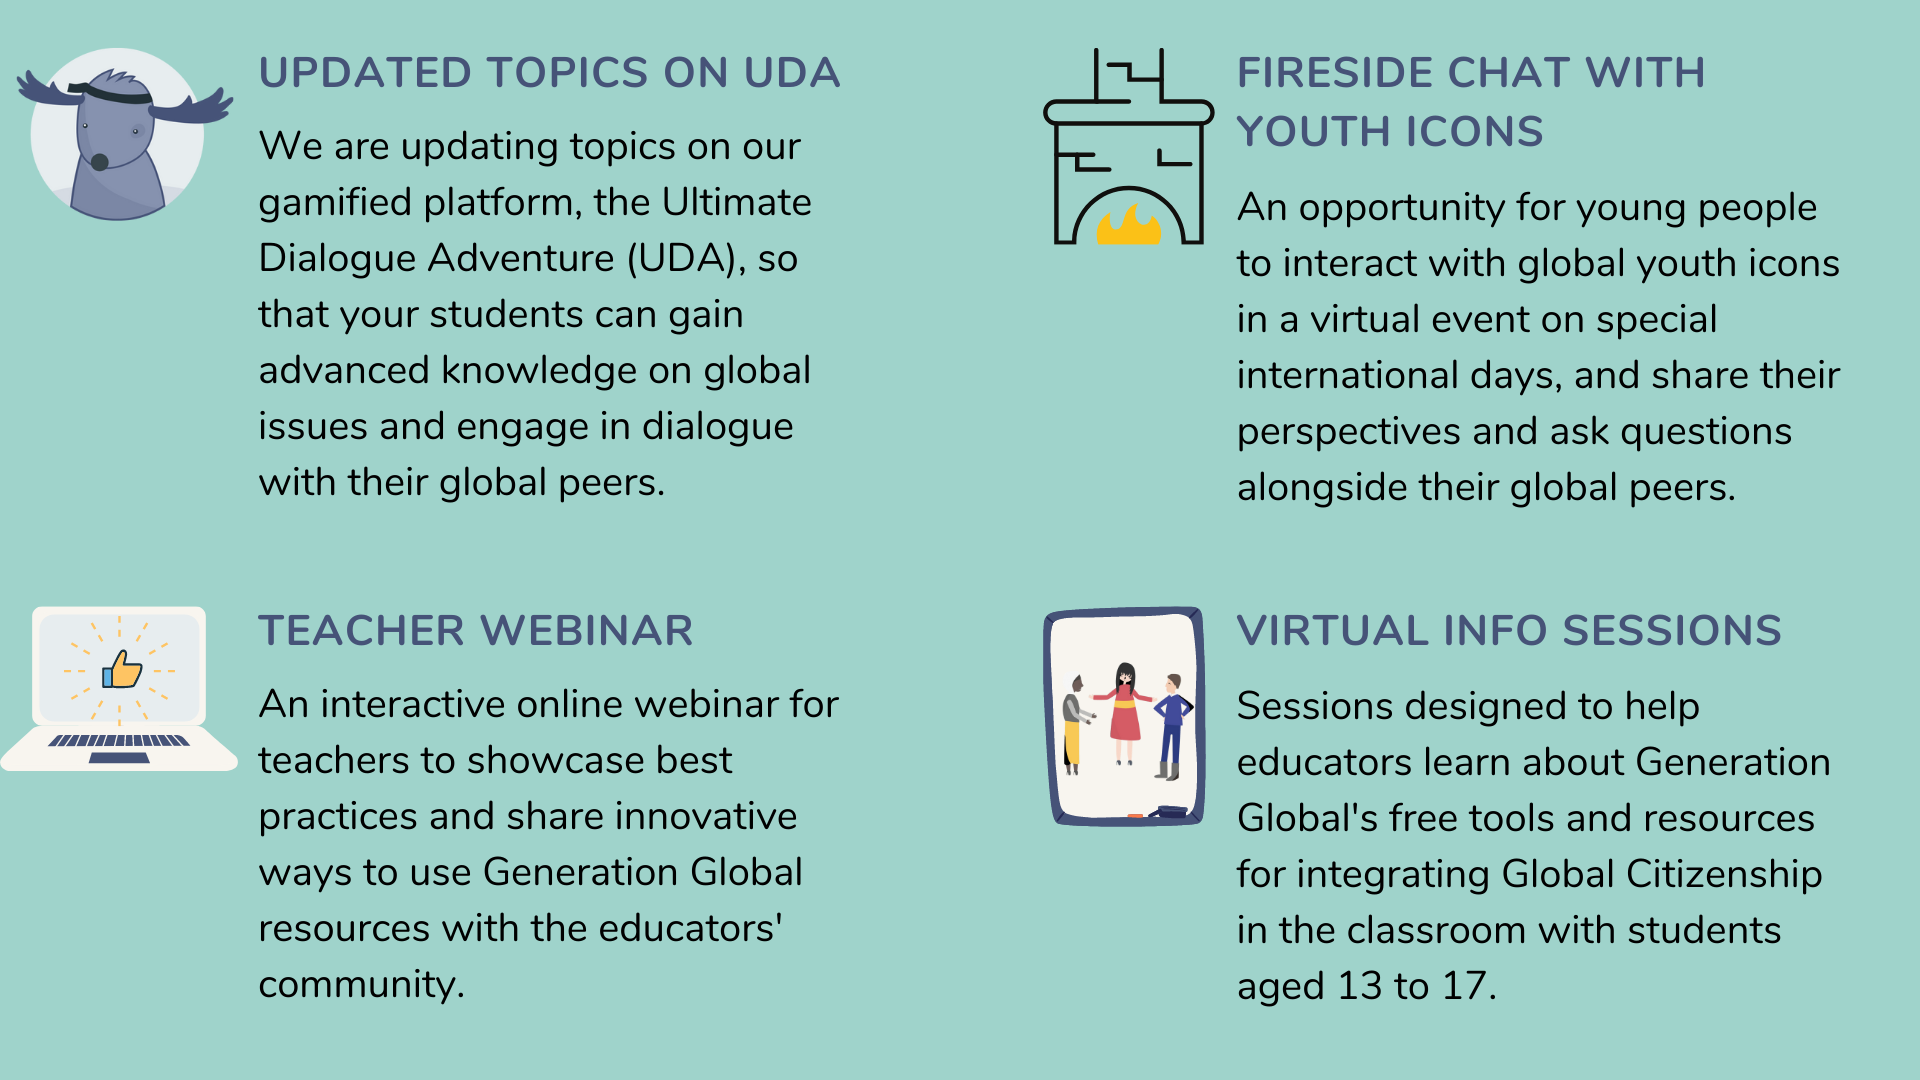 Updated topics on the UDA, Fireside chat with youth icons, Teacher
webinar and Virtual info
sessions.